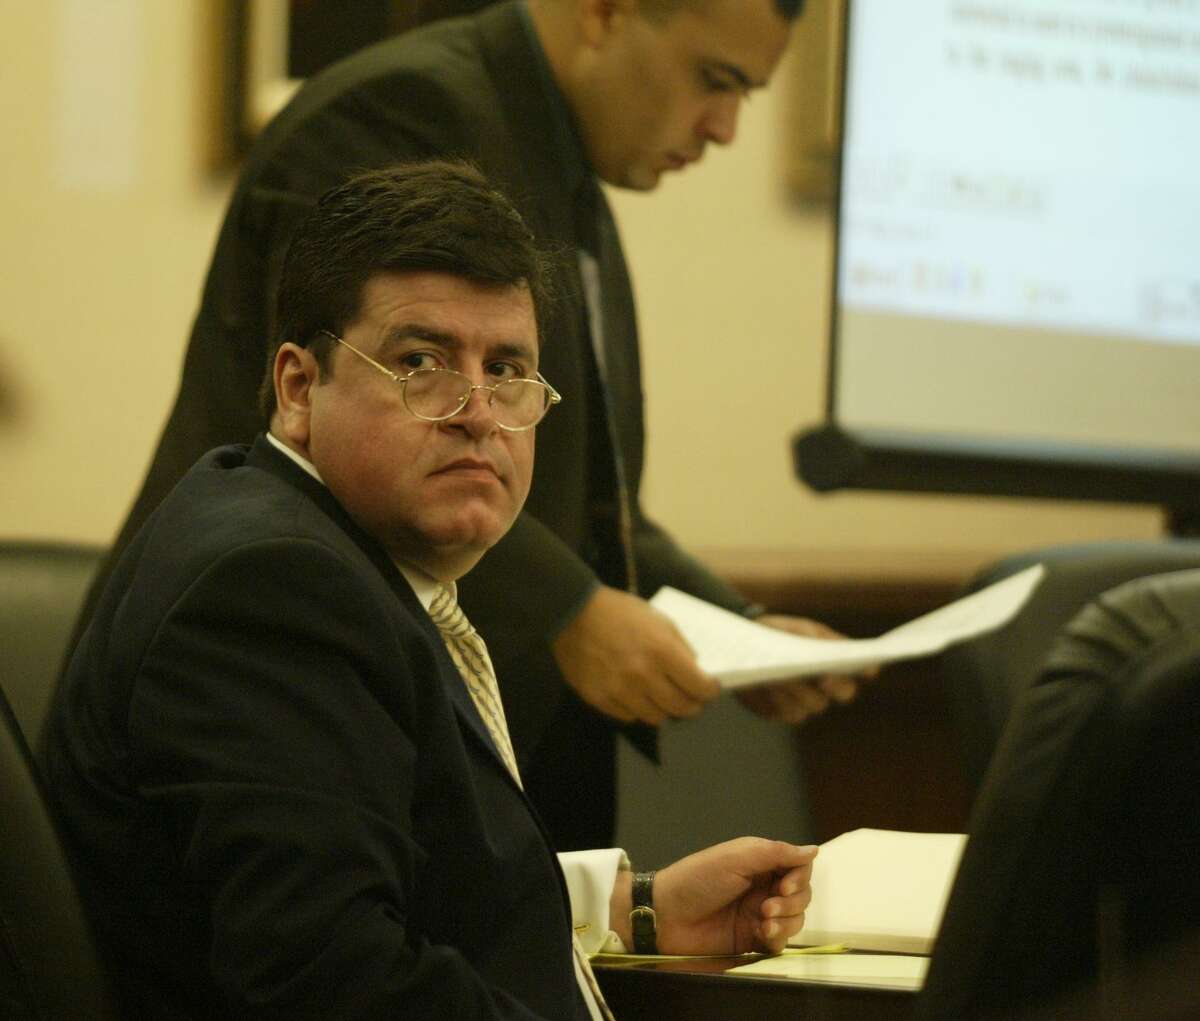 Former HPD Capt. Mark Aguirre, shown in this 2003 photo, is accused of aggravated assault with a deadly weapon for an incident in which he pulled over an air conditioning repairman and held him at gunpoint believing the man had 750,000 fraudulent mail-in ballots.